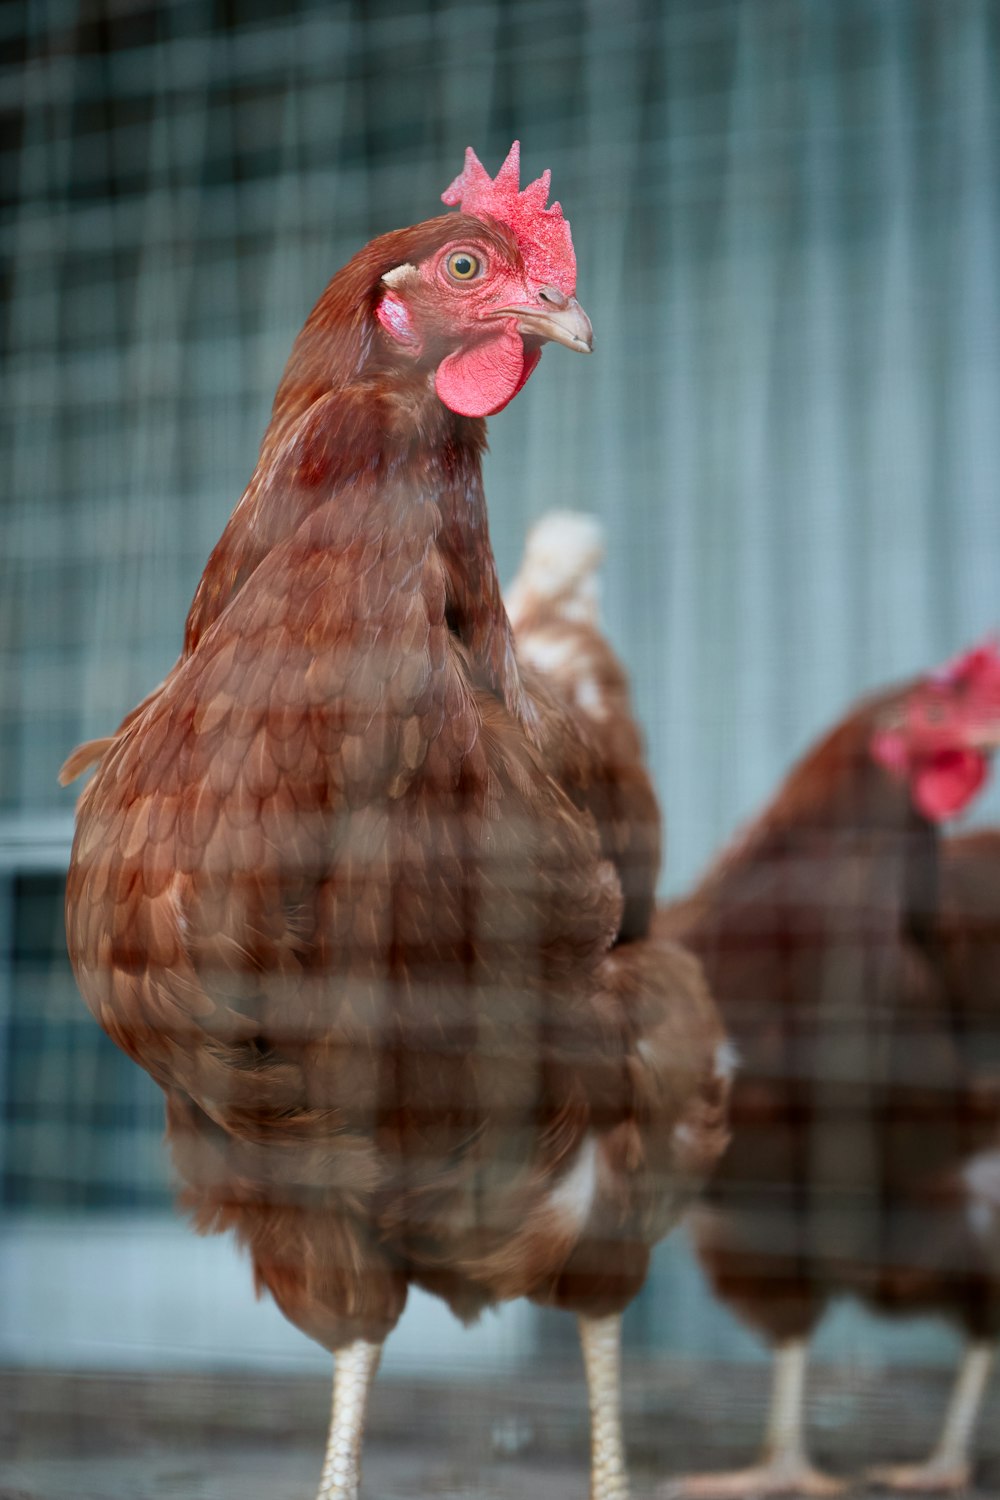 brown hen in cage during daytime